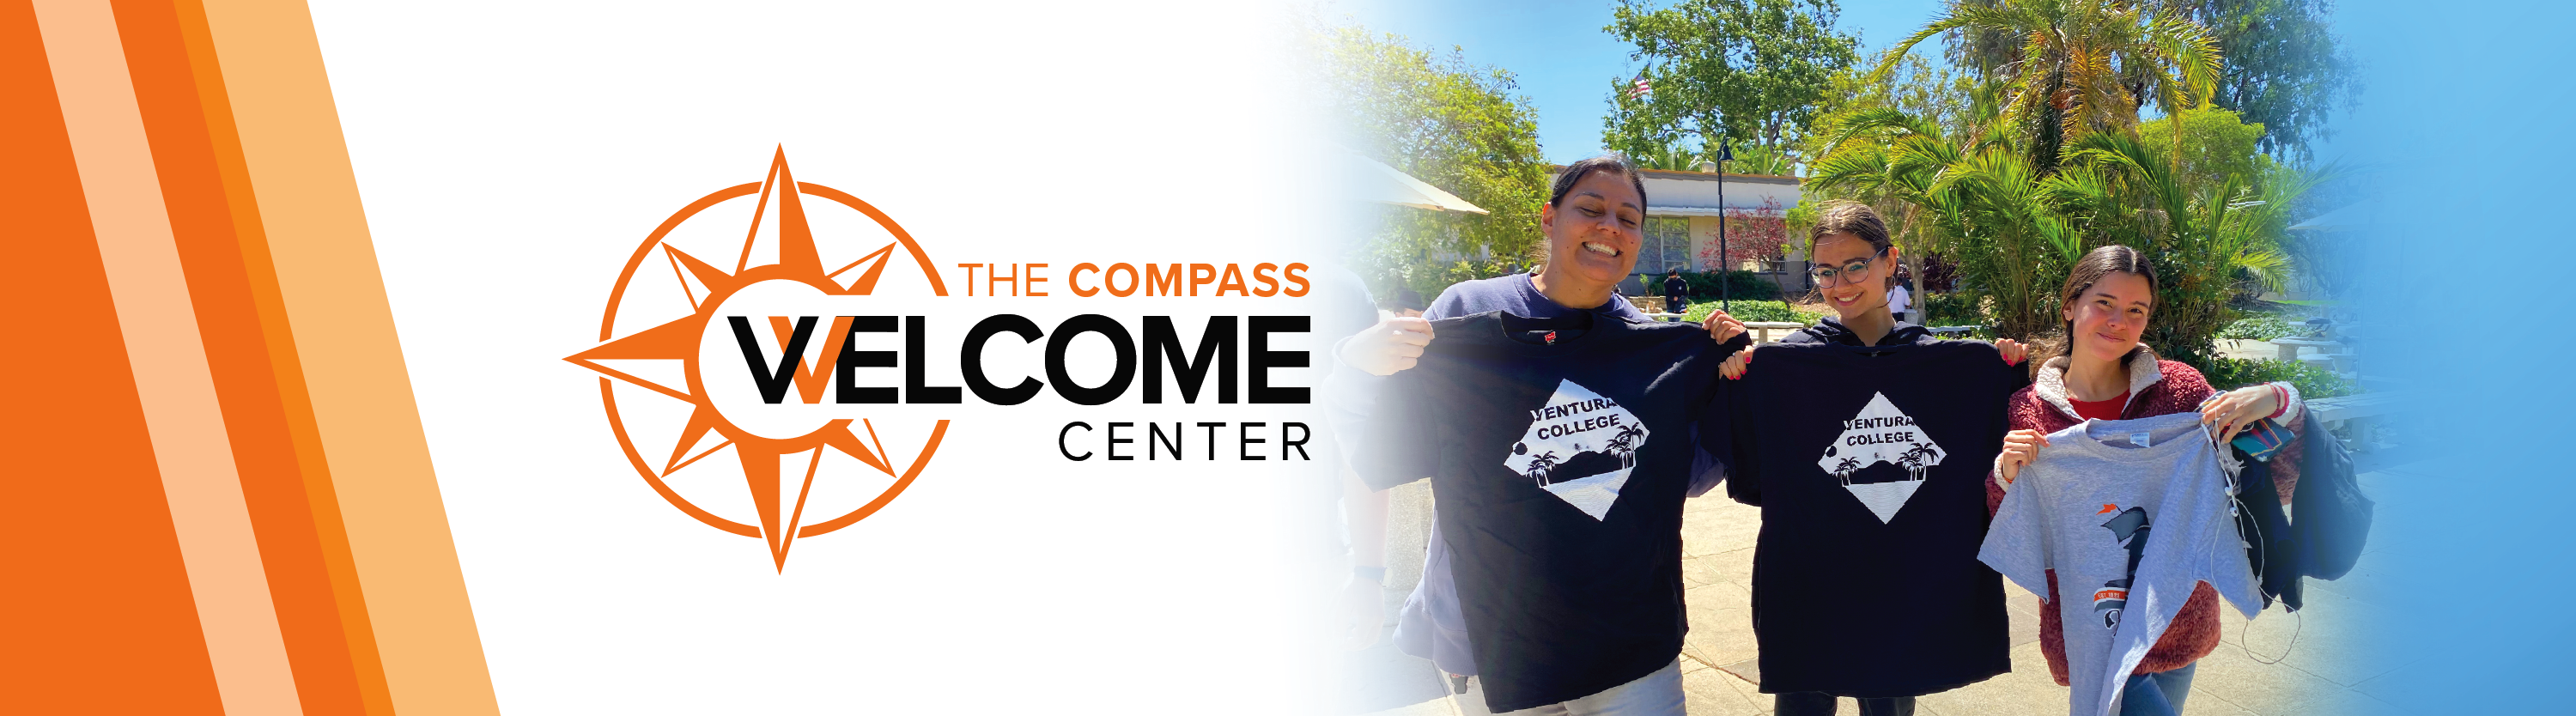 photo of 3 students holding ventura college t-shirts with welcome center logo